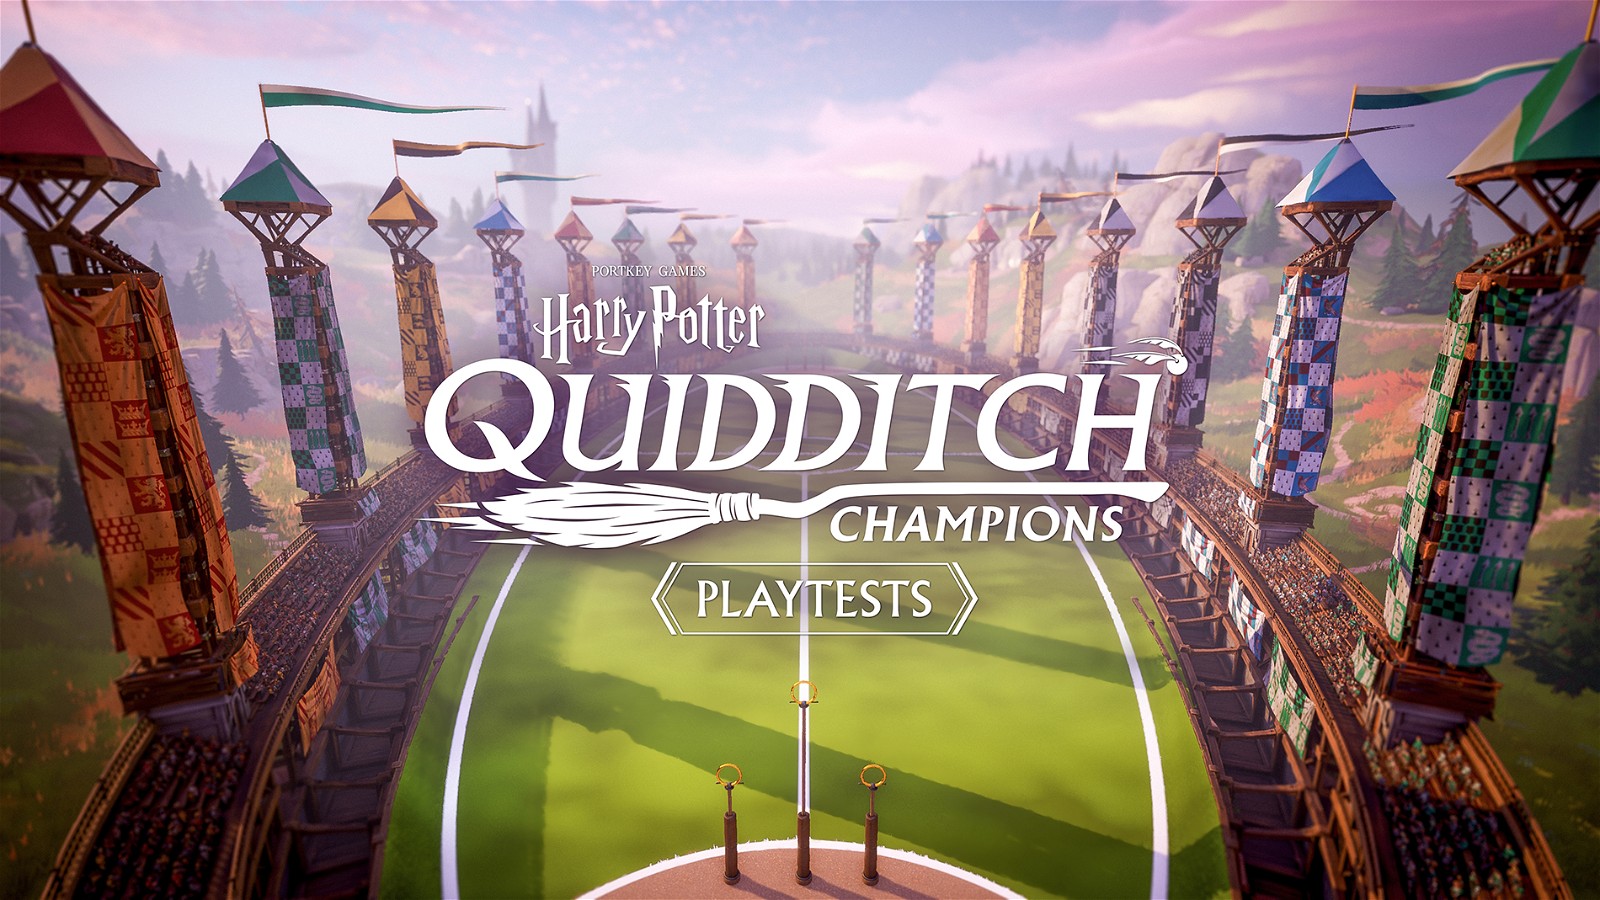 Looks Terrible Every Aspect Of It Harry Potter Quidditch Champions Gameplay Leaks